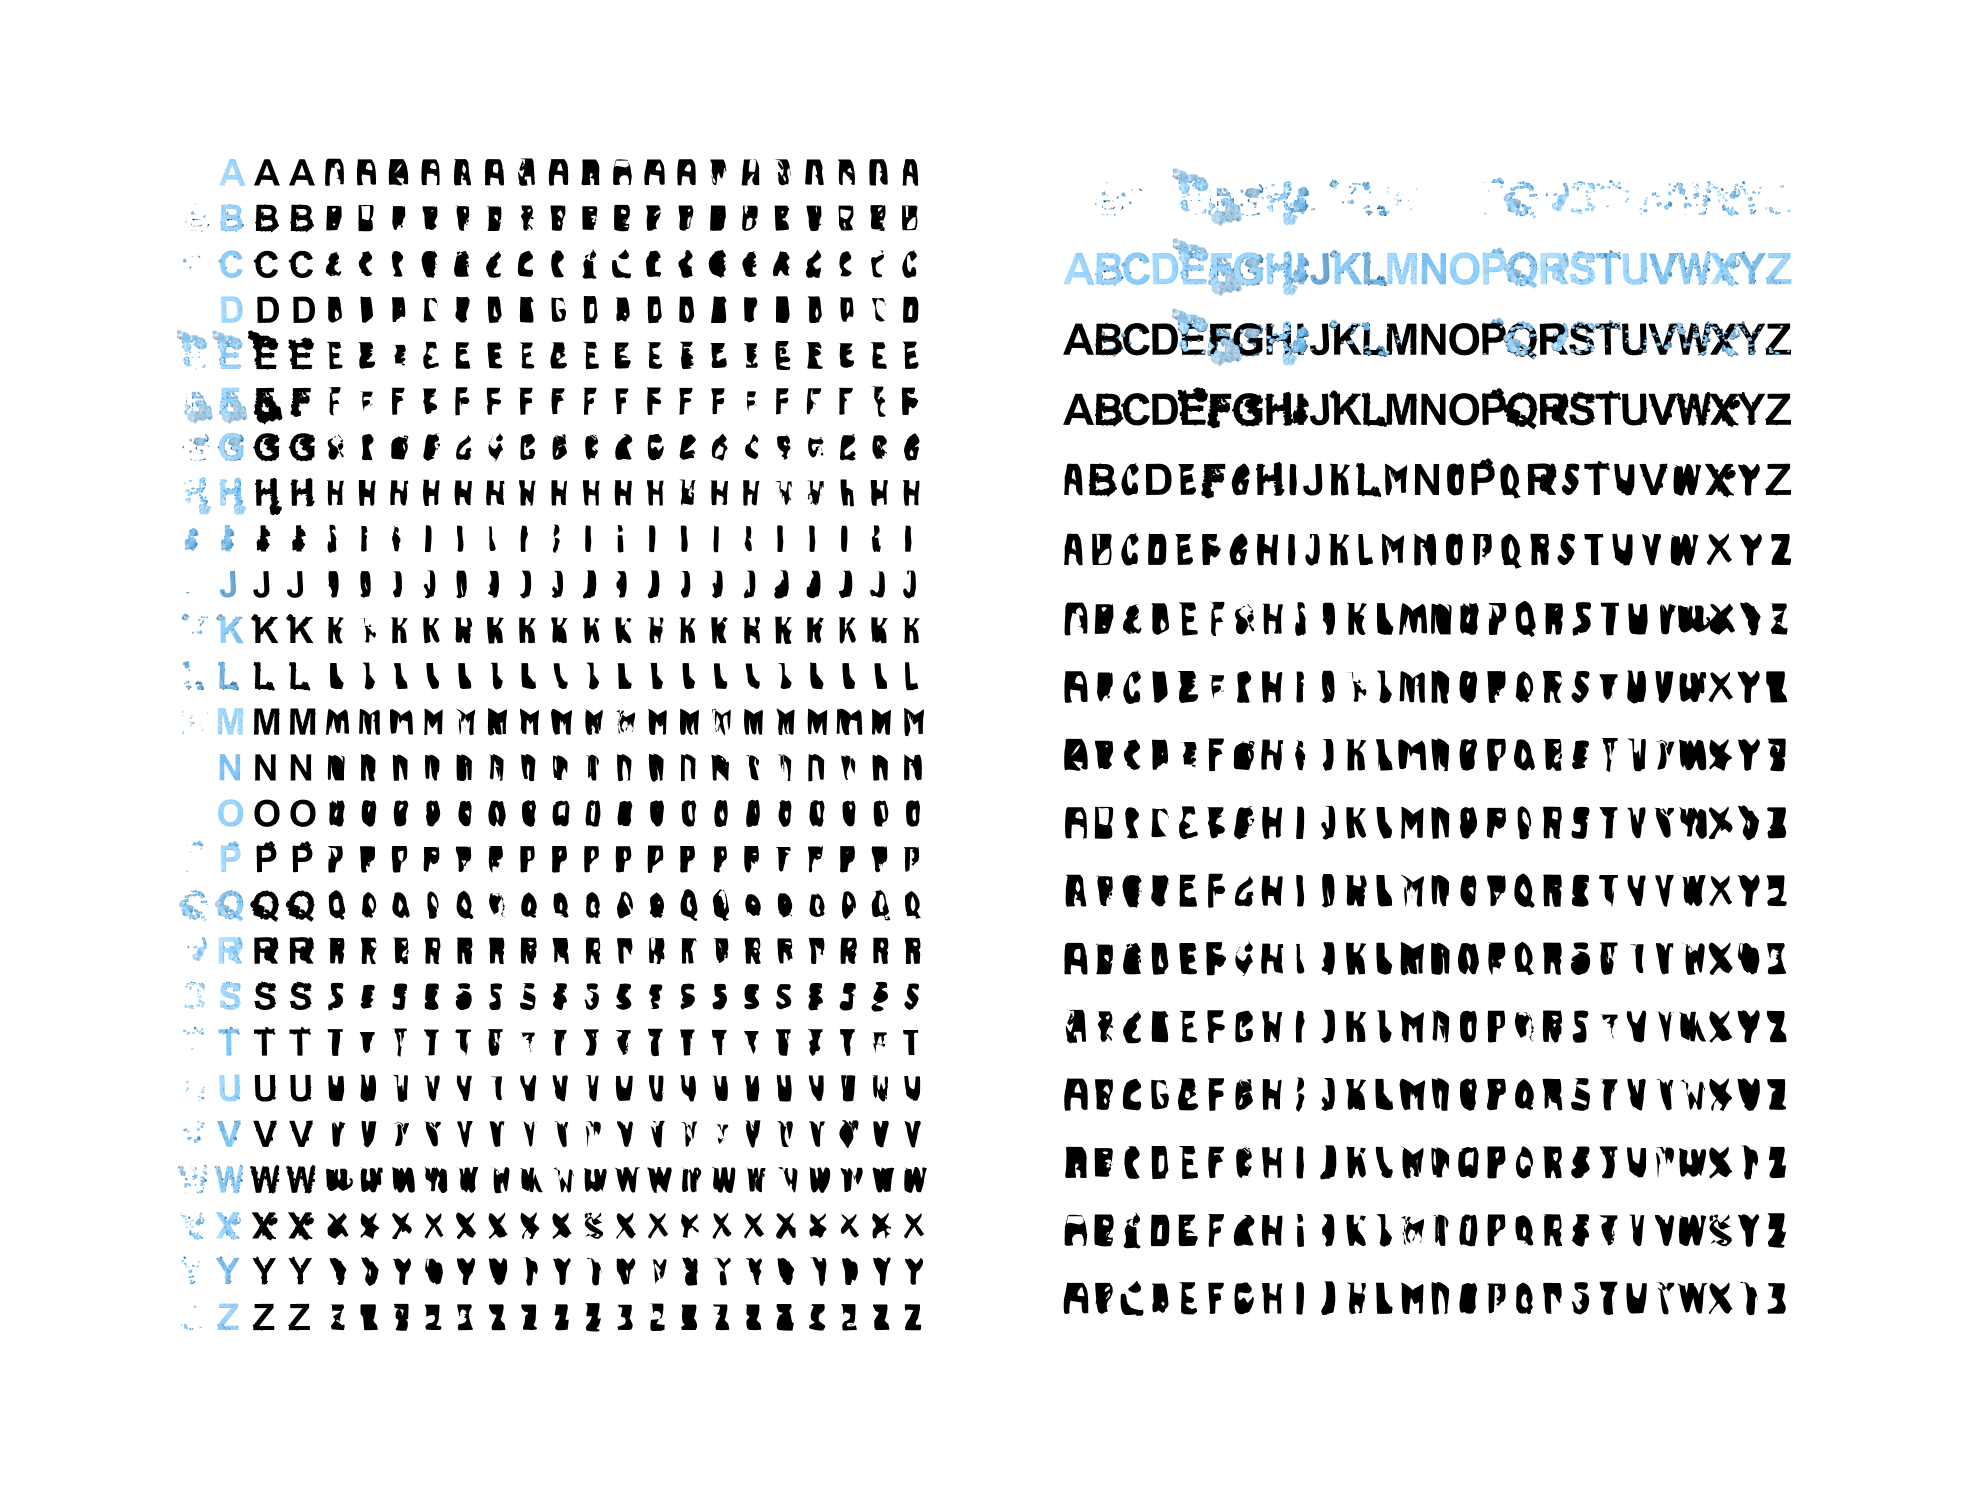 Crystal type: Physiomorphic font design through generative tooling